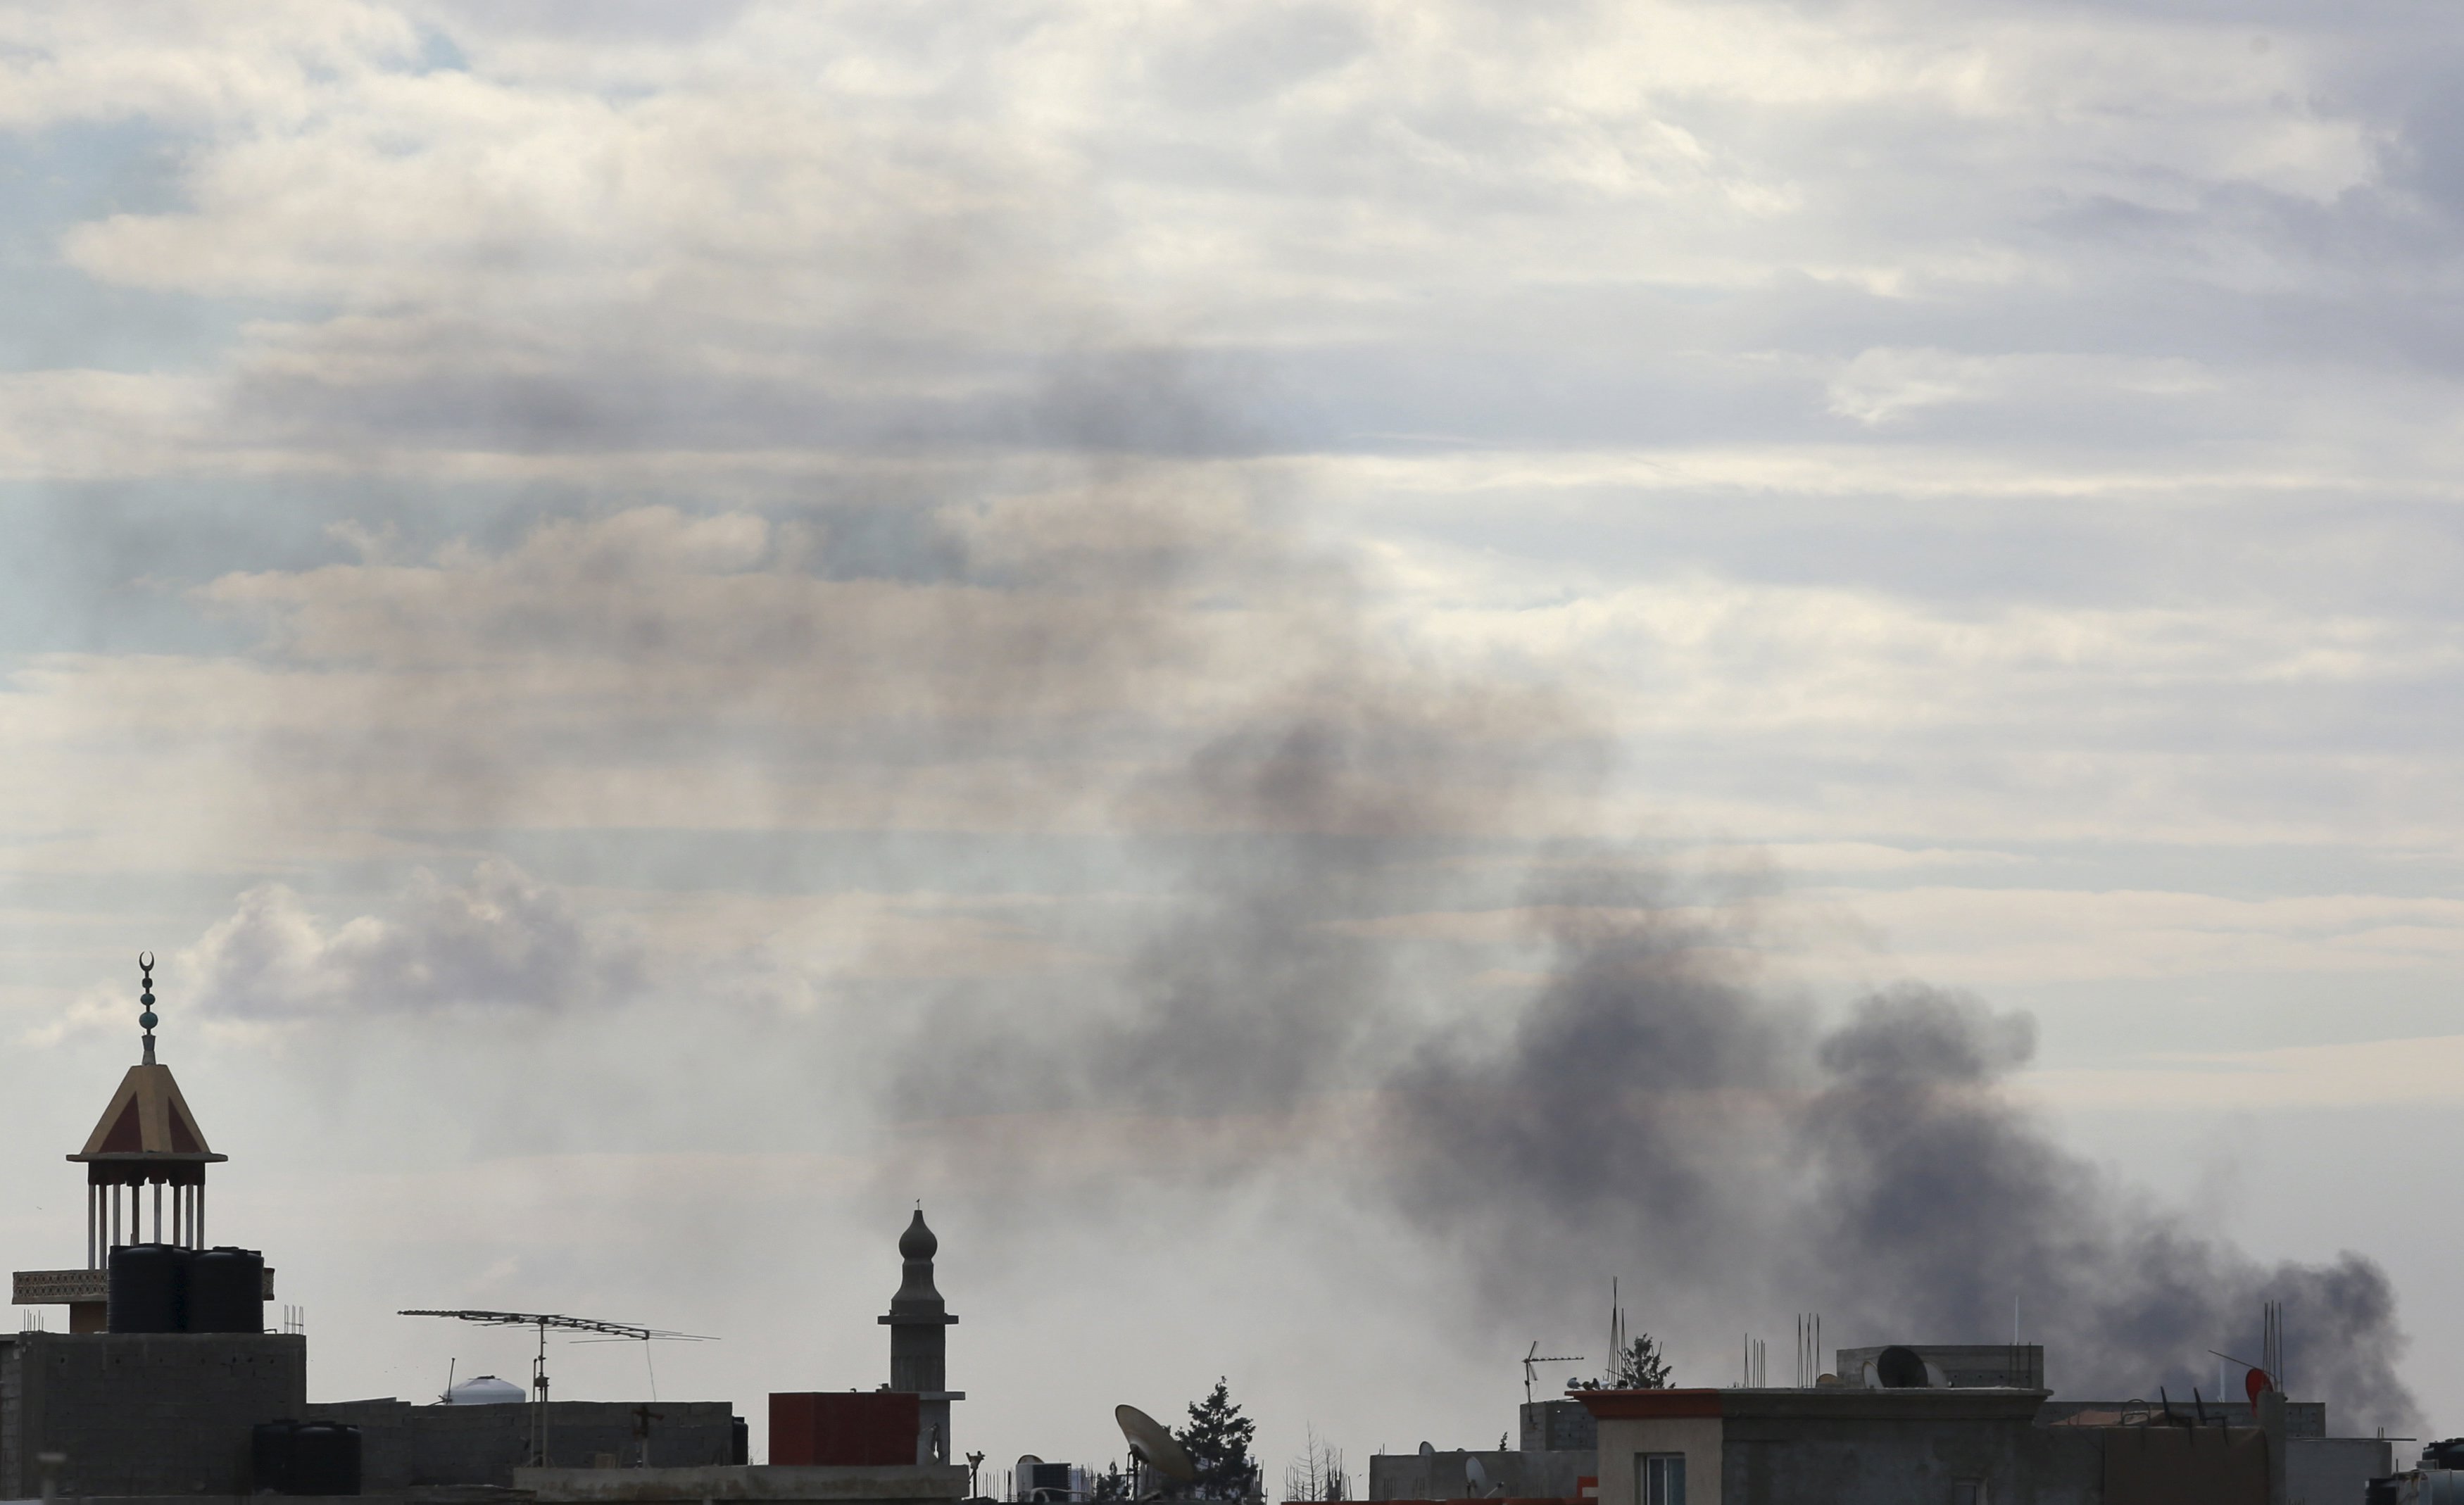 Black smoke billows in the sky above areas where clashes are taking place between pro-government forces, who are backed by the locals, and the Shura Council of Libyan Revolutionaries, an alliance of former anti-Gaddafi rebels who have joined forces with the Islamist group Ansar al-Sharia, in Benghazi, Libya December 15, 2015. REUTERS/Esam Omran Al-Fetori